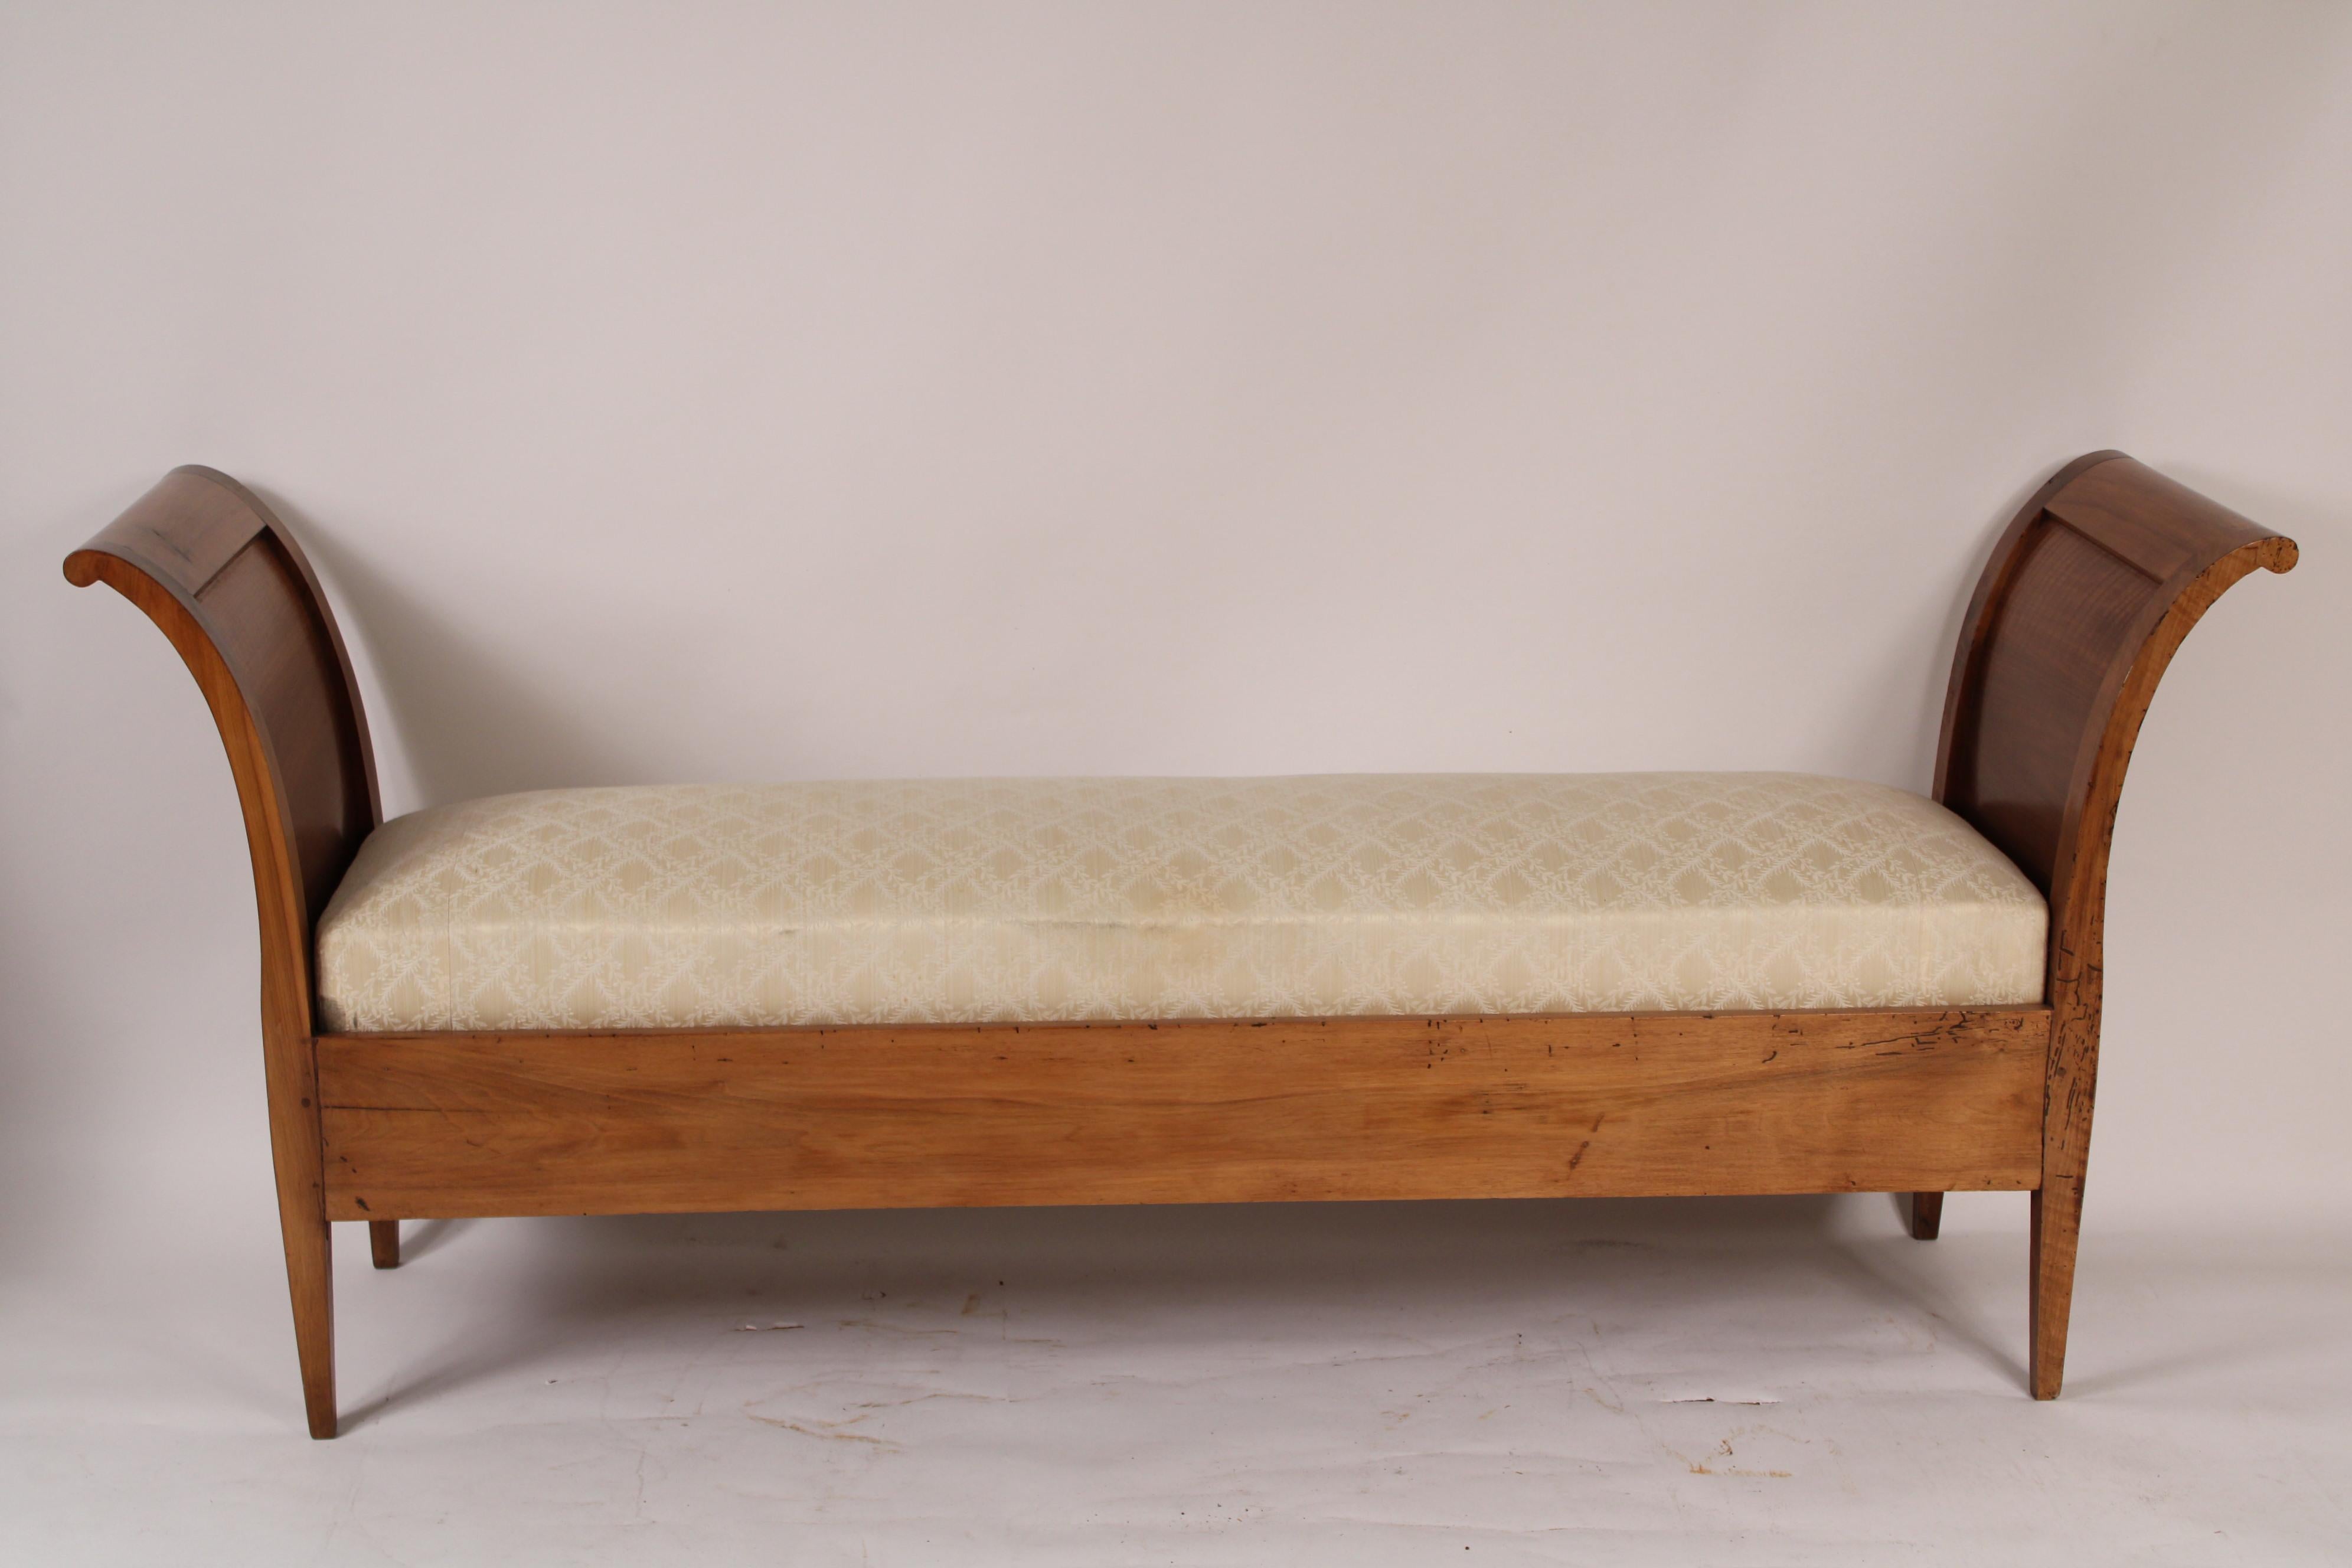 Antique Continental birch daybed / window seat, 19th century. With mortise tenon and peg 
joinery.